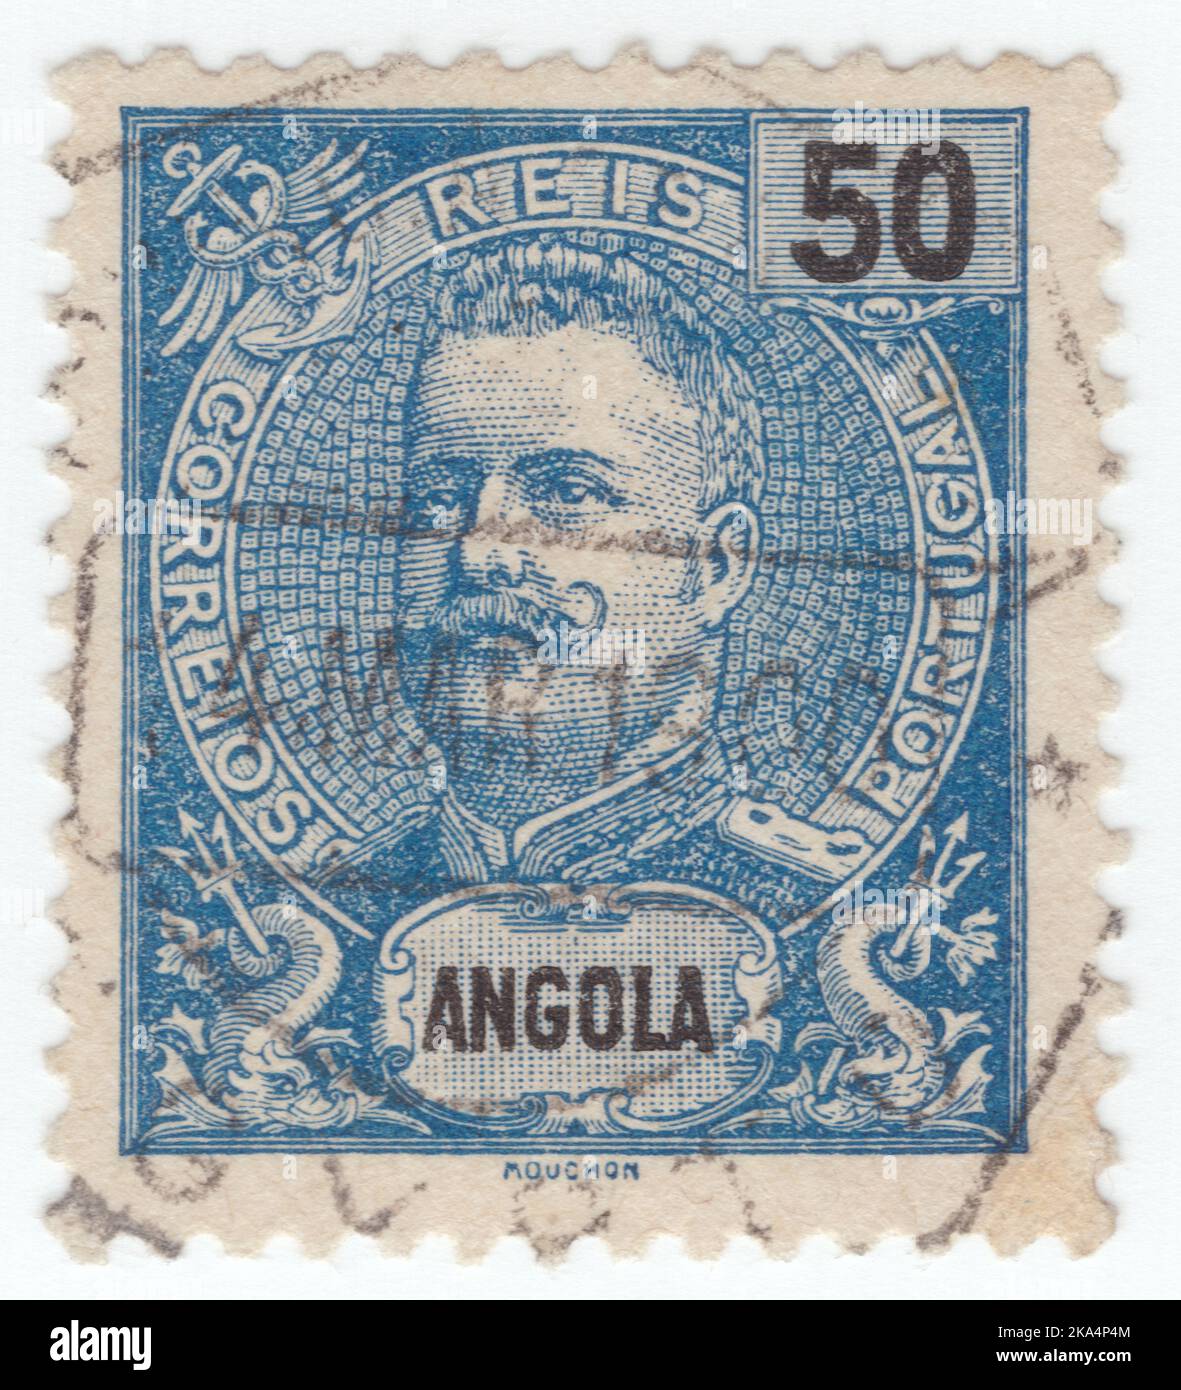 ANGOLA - CIRCA 1898: An 50 reis blue postage stamp showing portrait of Dom Carlos I, known as the Diplomat, the Martyr, and the Oceanographer, among many other names, was the King of Portugal from 1889 until his assassination in 1908 Stock Photo